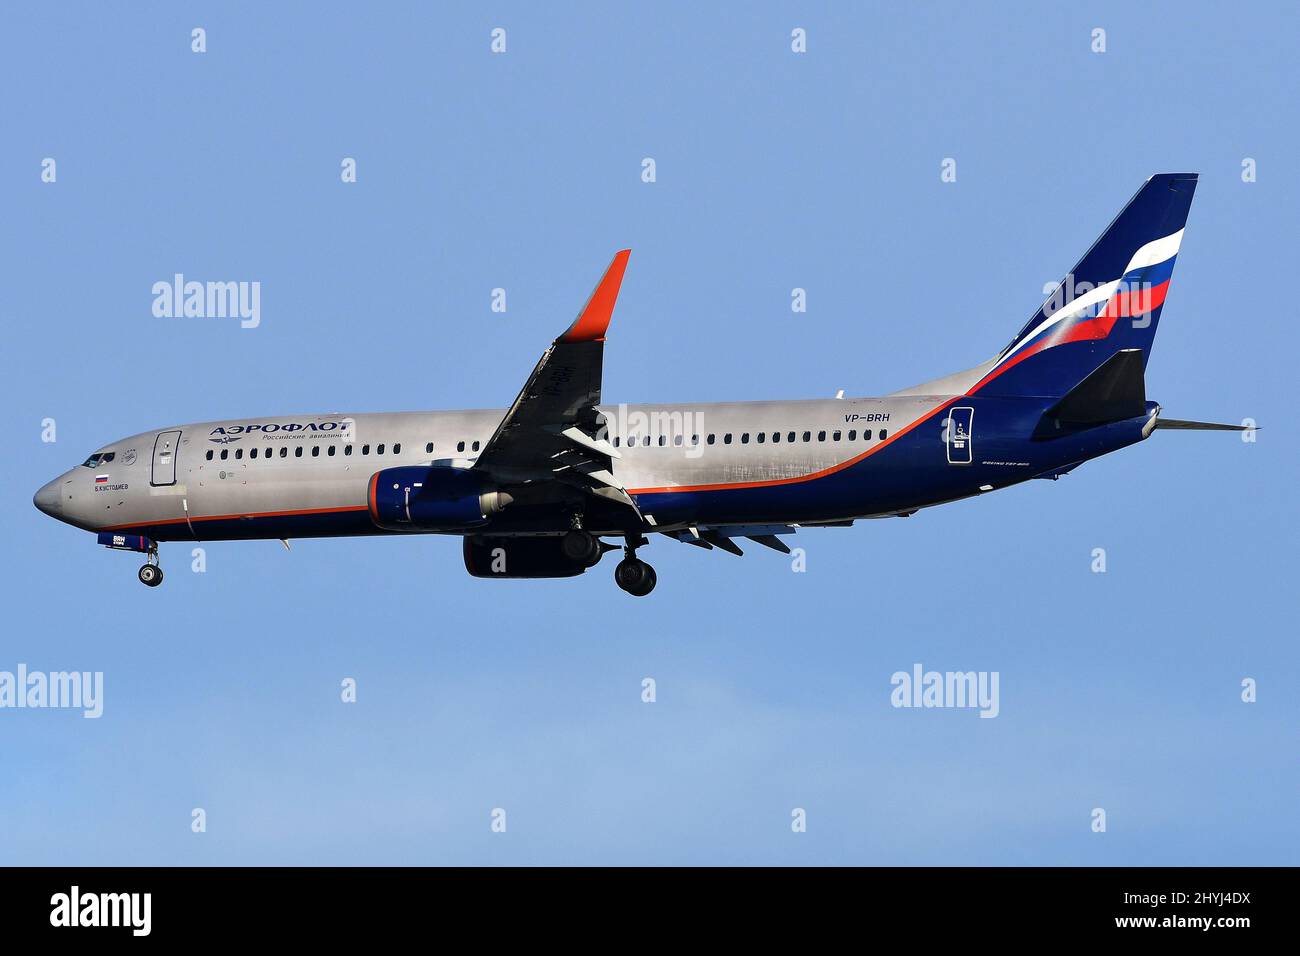 SANCTIONS - FOLLOWING RUSSIAN INVASION OF UKRAINE AEROFLOT AIRLINE FORCED TO MOVE AIRCRAFT FROM BERMUDA TO RUSSIAN REGISTER. BOEING 737-800(W) VP-BRH. Stock Photo